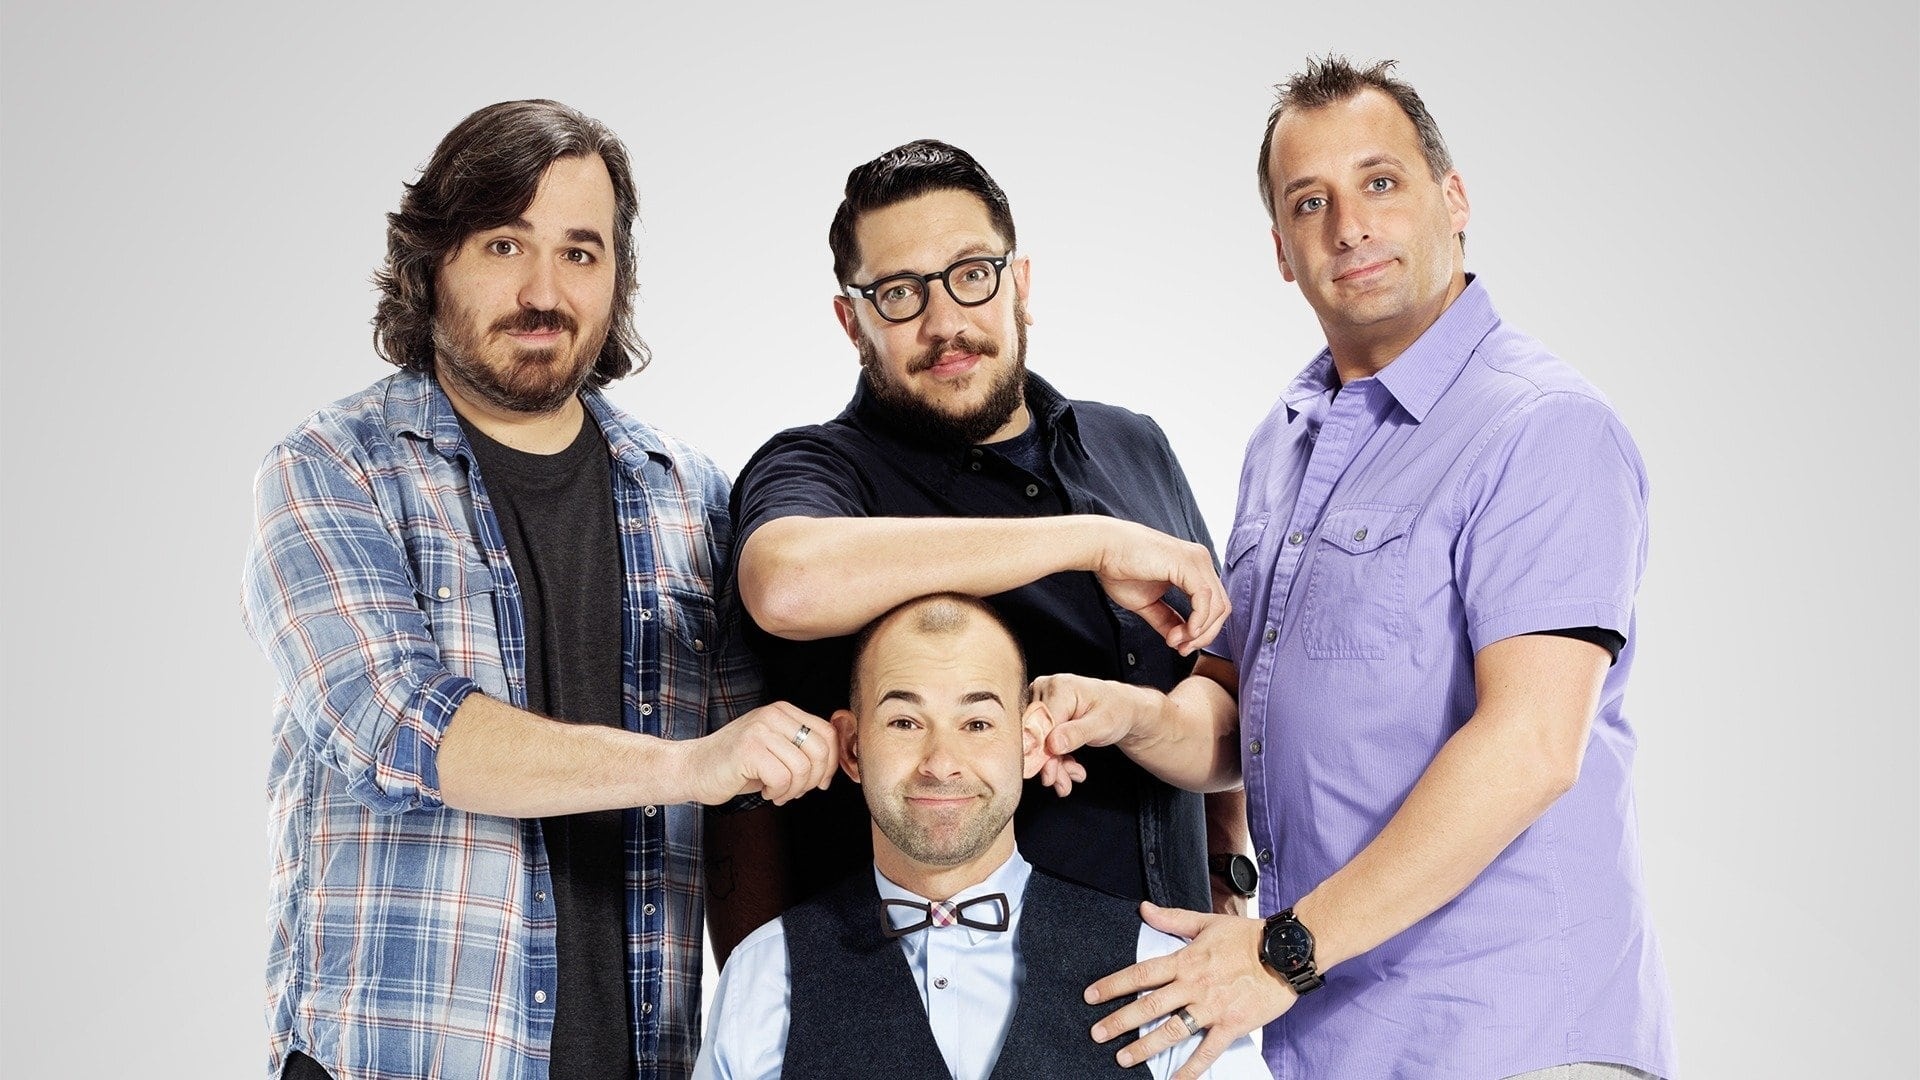 Impractical Jokers, Entertaining TV series, Behind the scenes, Laughter and chaos, 1920x1080 Full HD Desktop